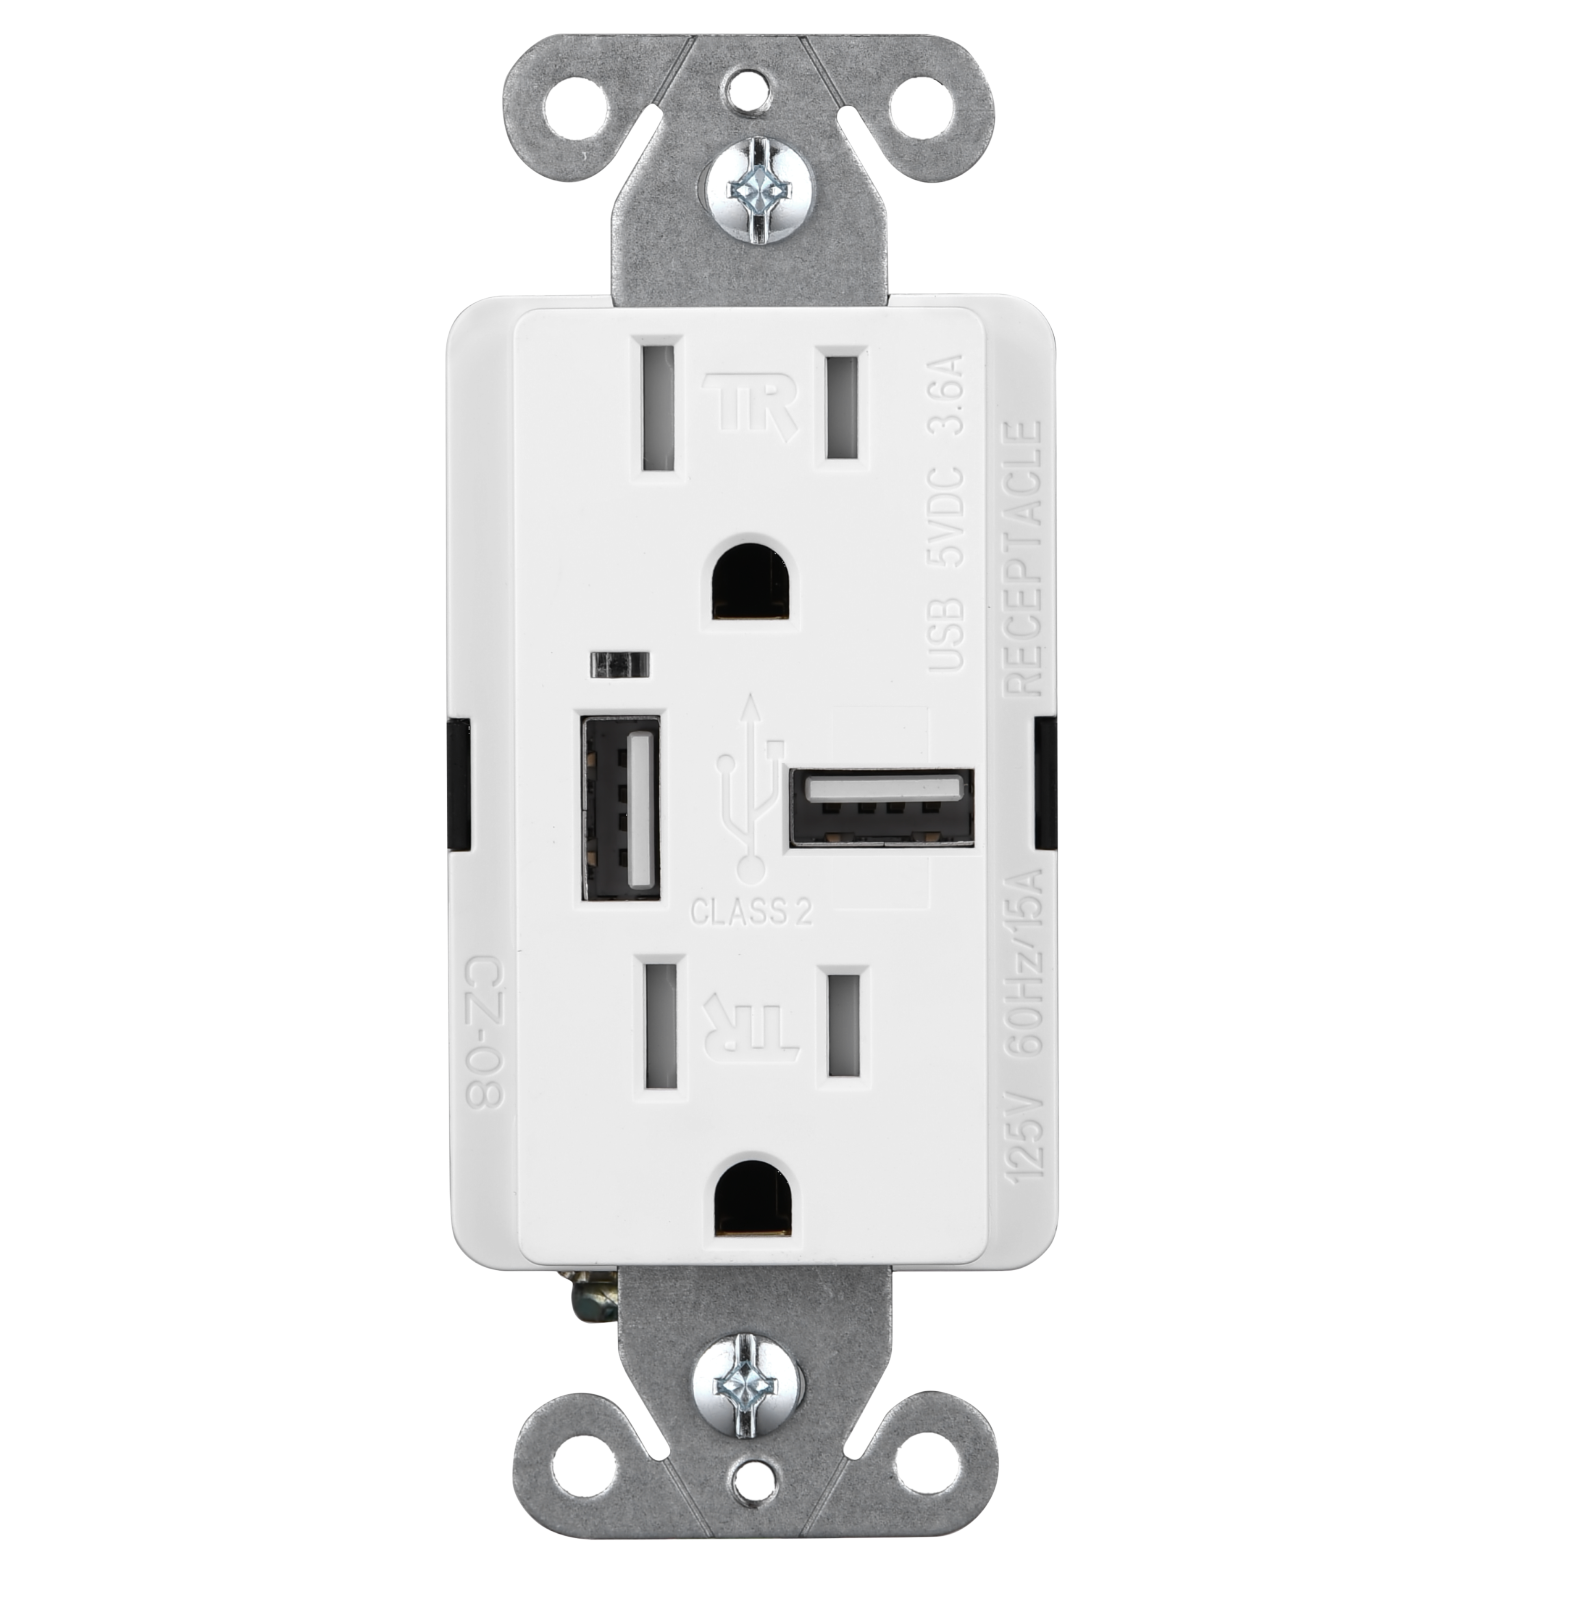 Faith UL ລາຍຊື່ 3.6 A USB Wall Outlet Charger 15A Duplex Tamper-Resistant Charging Power Outlet with USB Ports